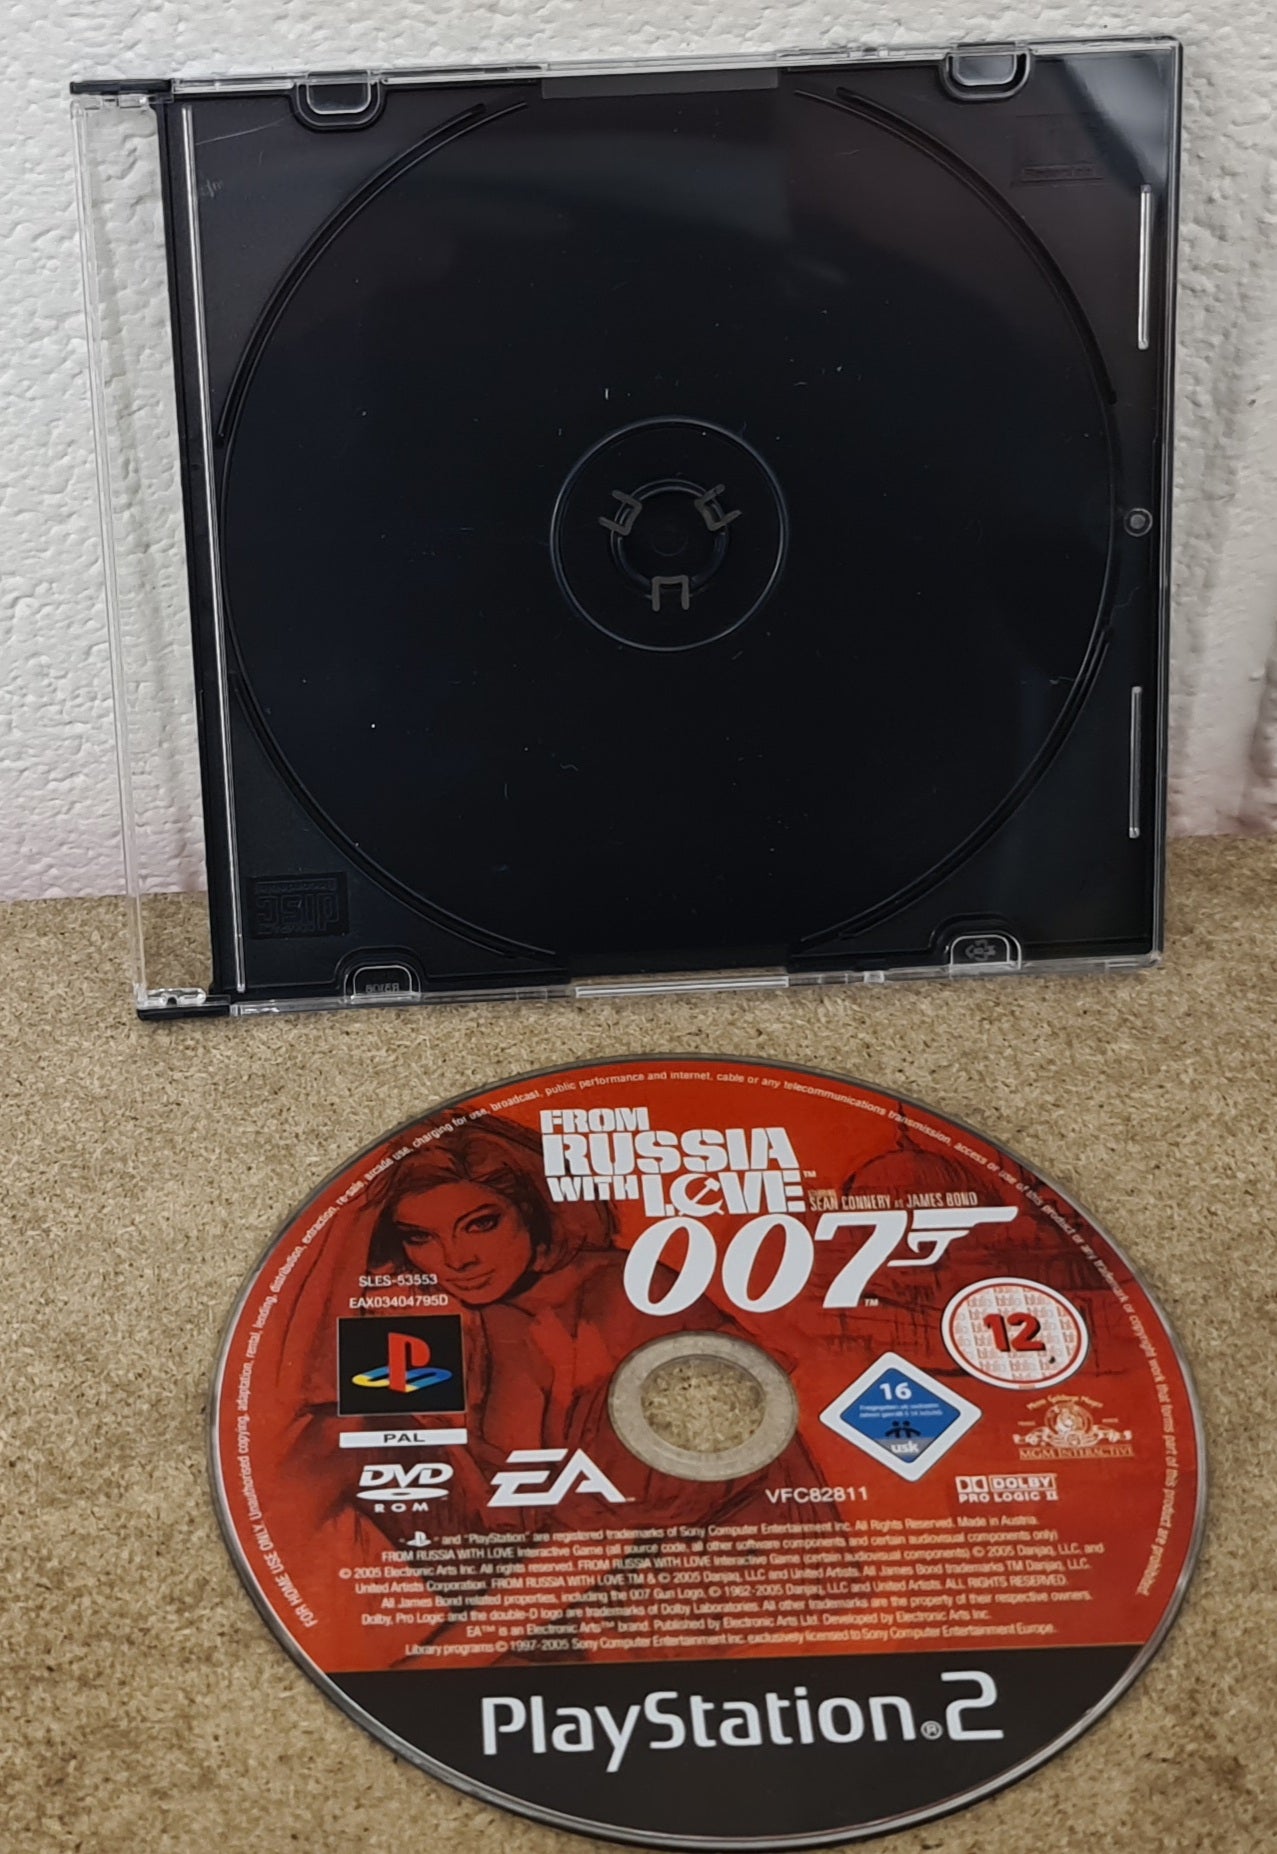 From Russia with Love Sony Playstation 2 (PS2) Game Disc Only